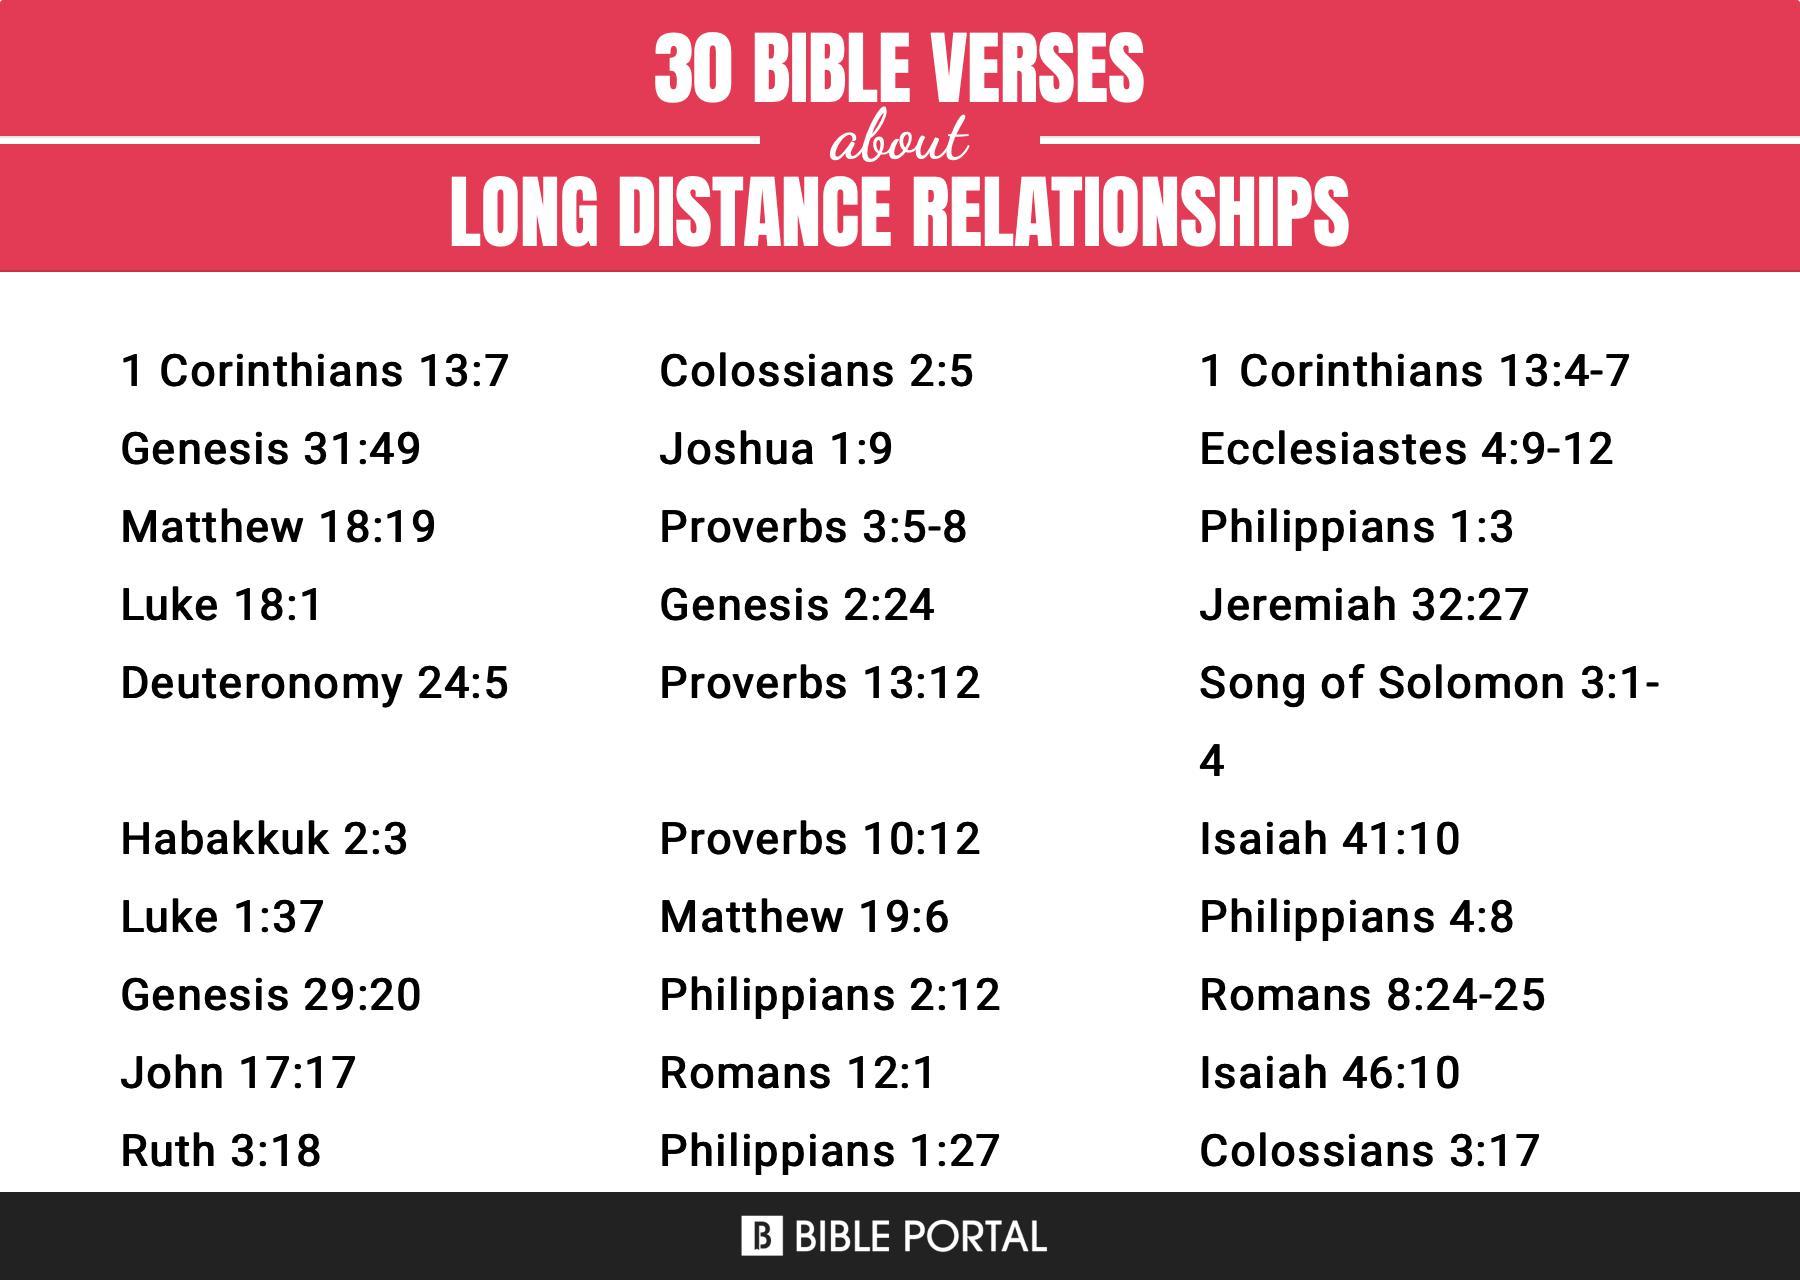 38 Bible Verses about Long Distance Relationships